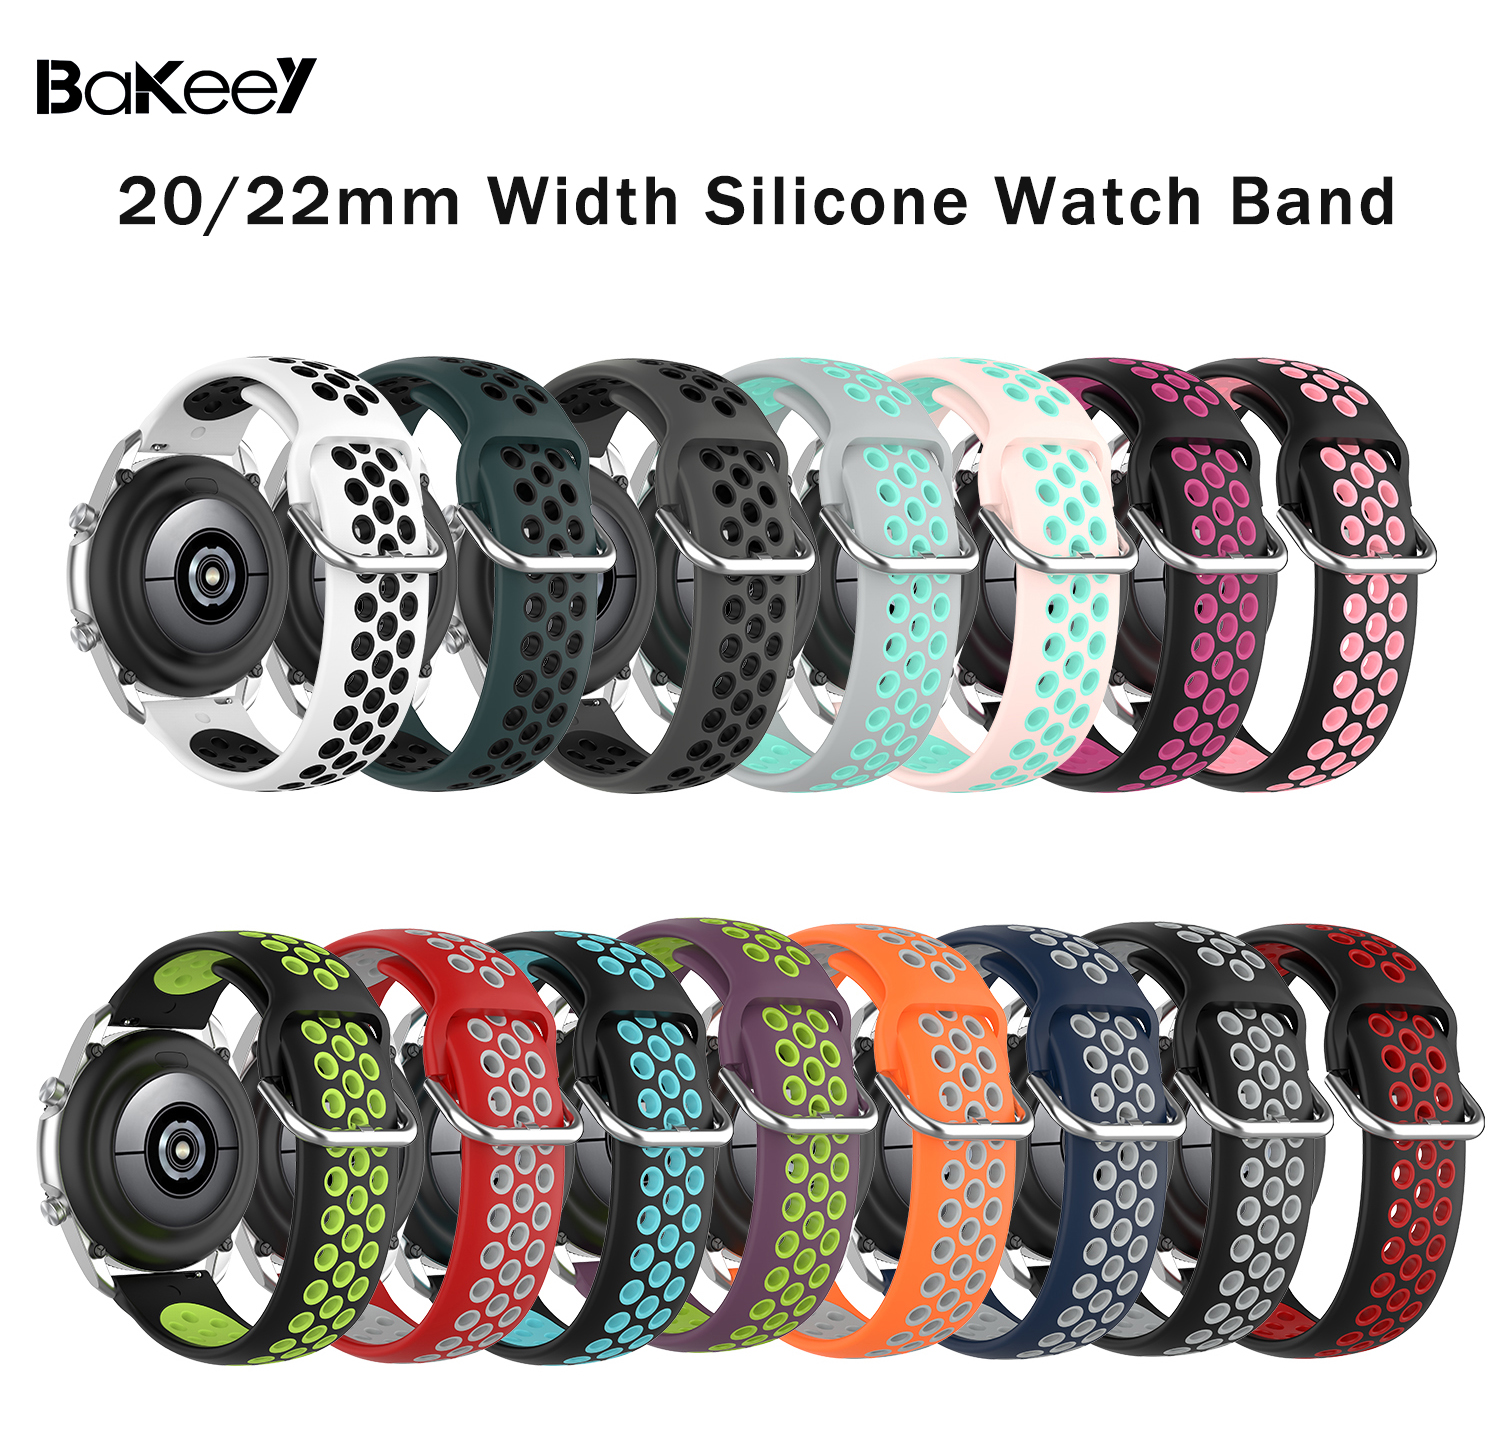 Bakeey-2022mm-Width-Universal-Sports-Dot-Pattern-Soft-Silicone-Watch-Band-Strap-Replacement-for-Sams-1736311-1